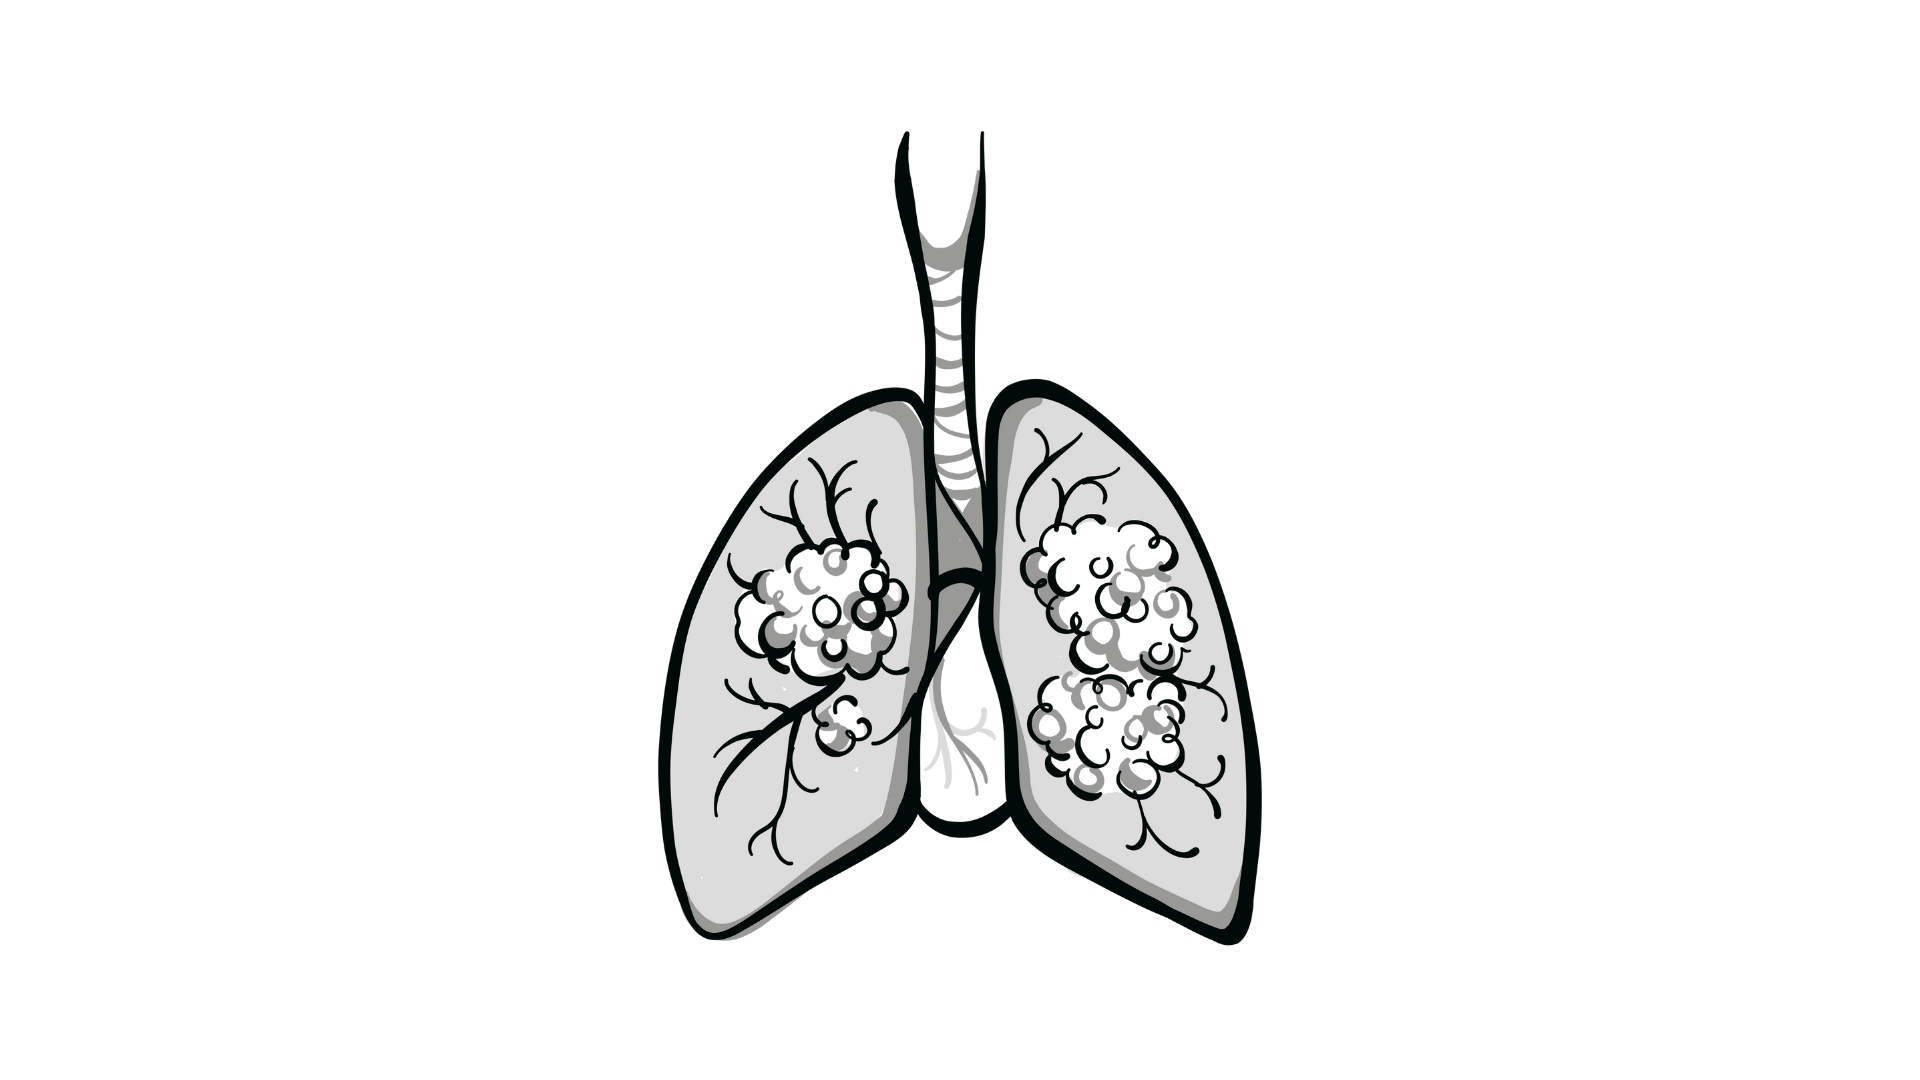 Worth The Wait? Genomic Testing Delays Initiation of Advanced NSCLC Therapy